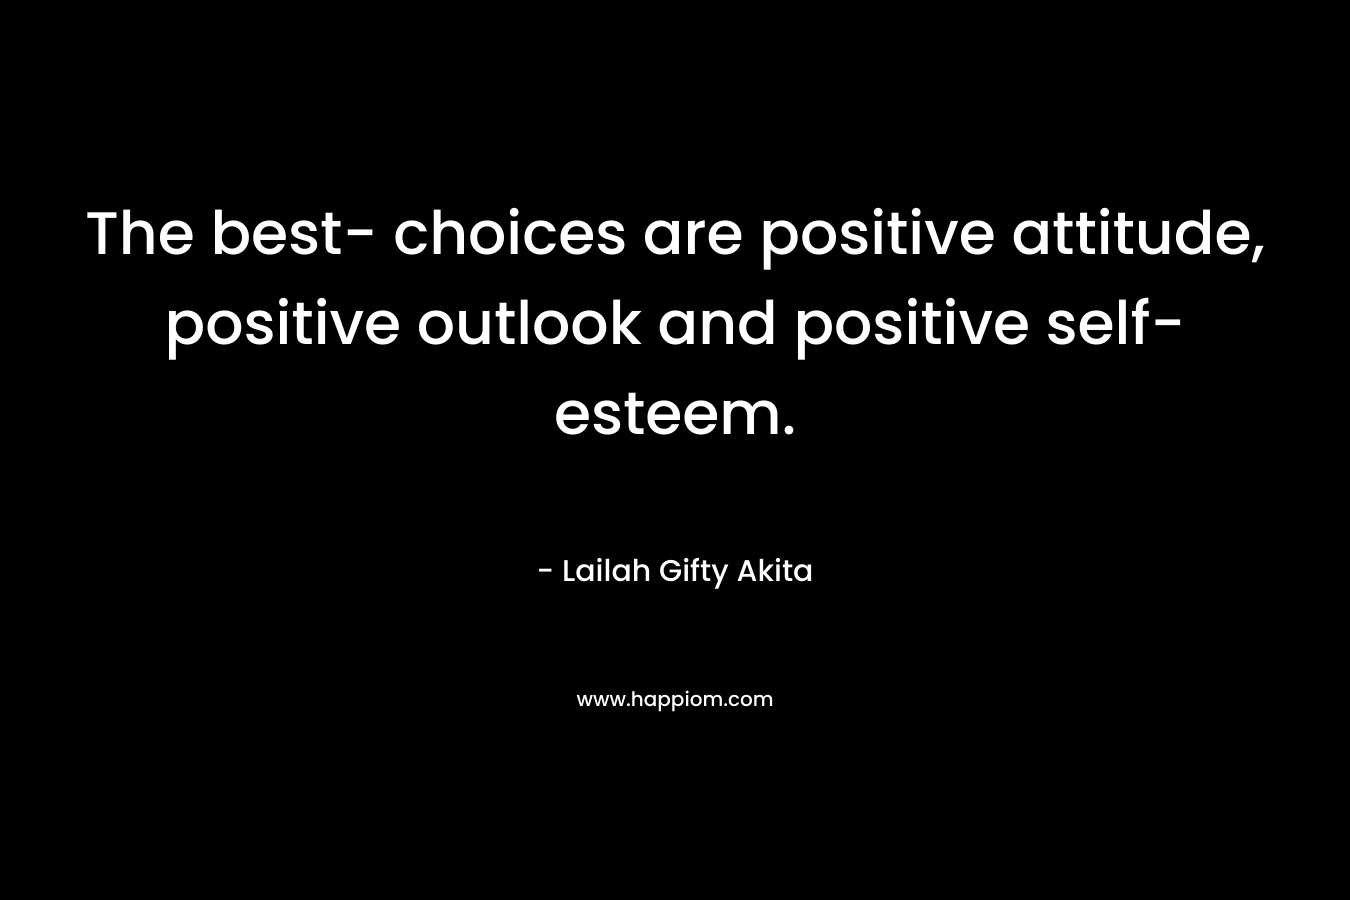 The best- choices are positive attitude, positive outlook and positive self-esteem.